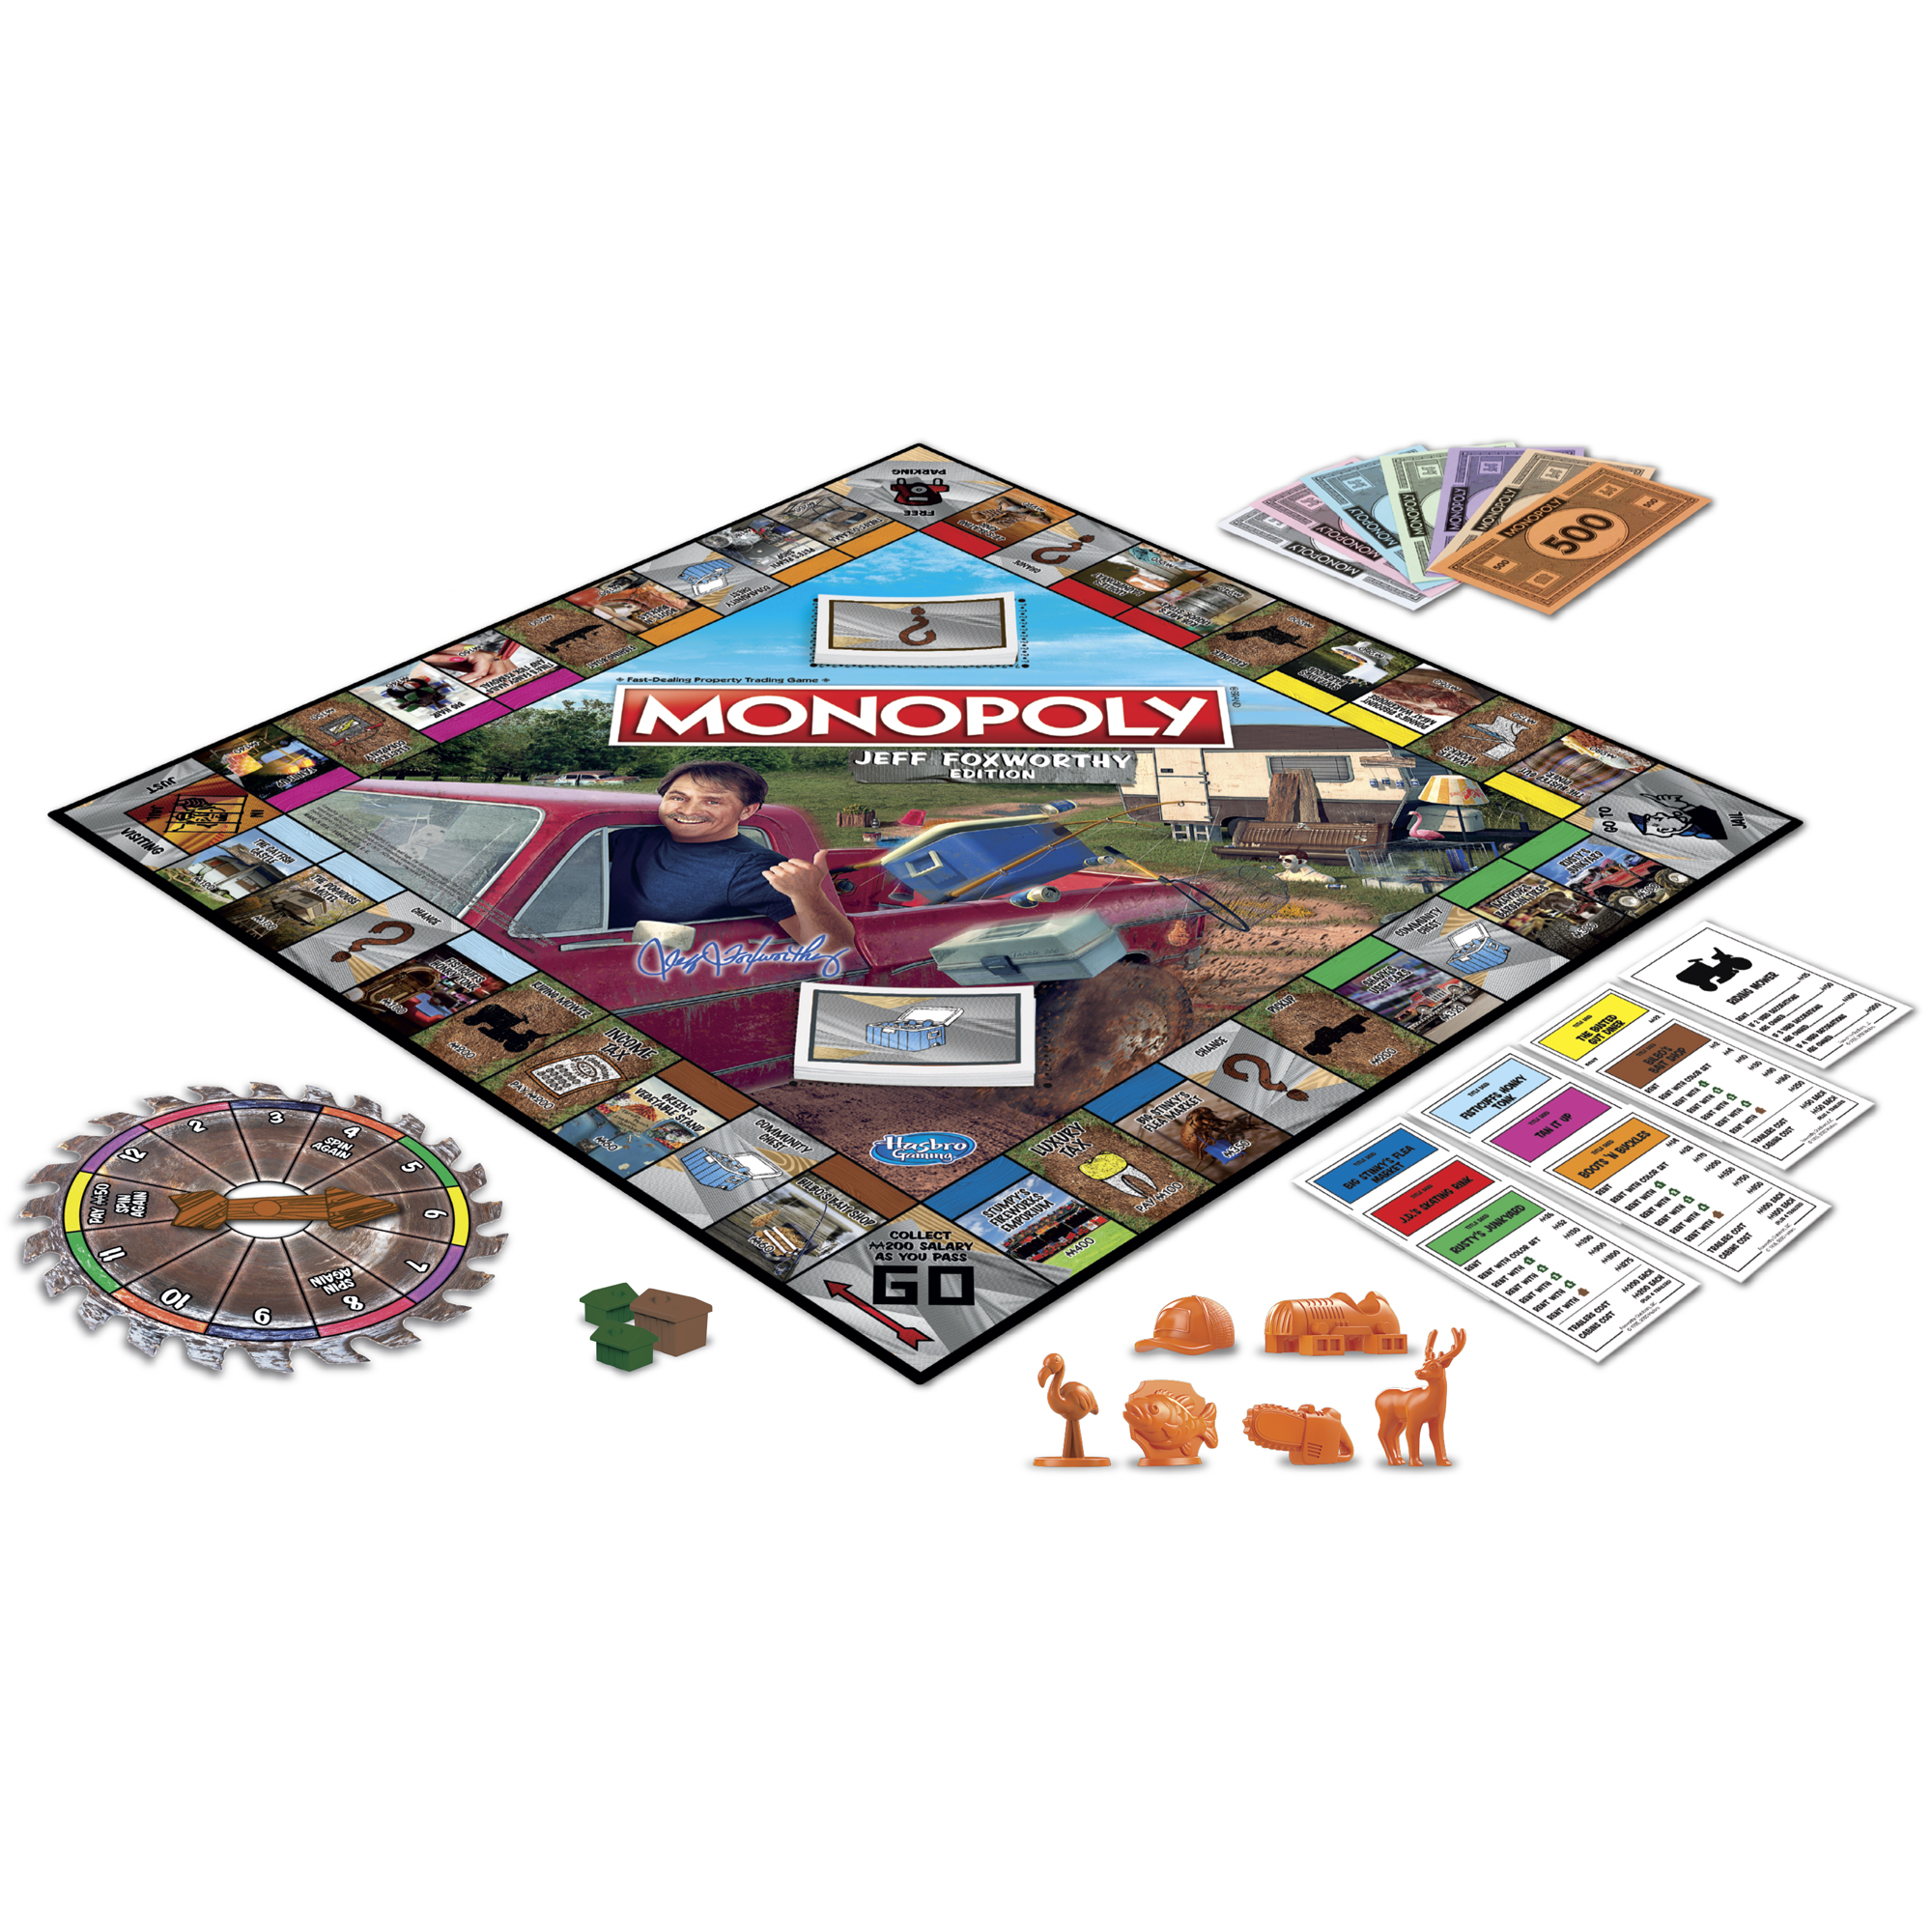 Monopoly Jeff Foxworthy Edition Board Game for Kids and Family Ages 8 and Up, 2-6 Players - image 5 of 6